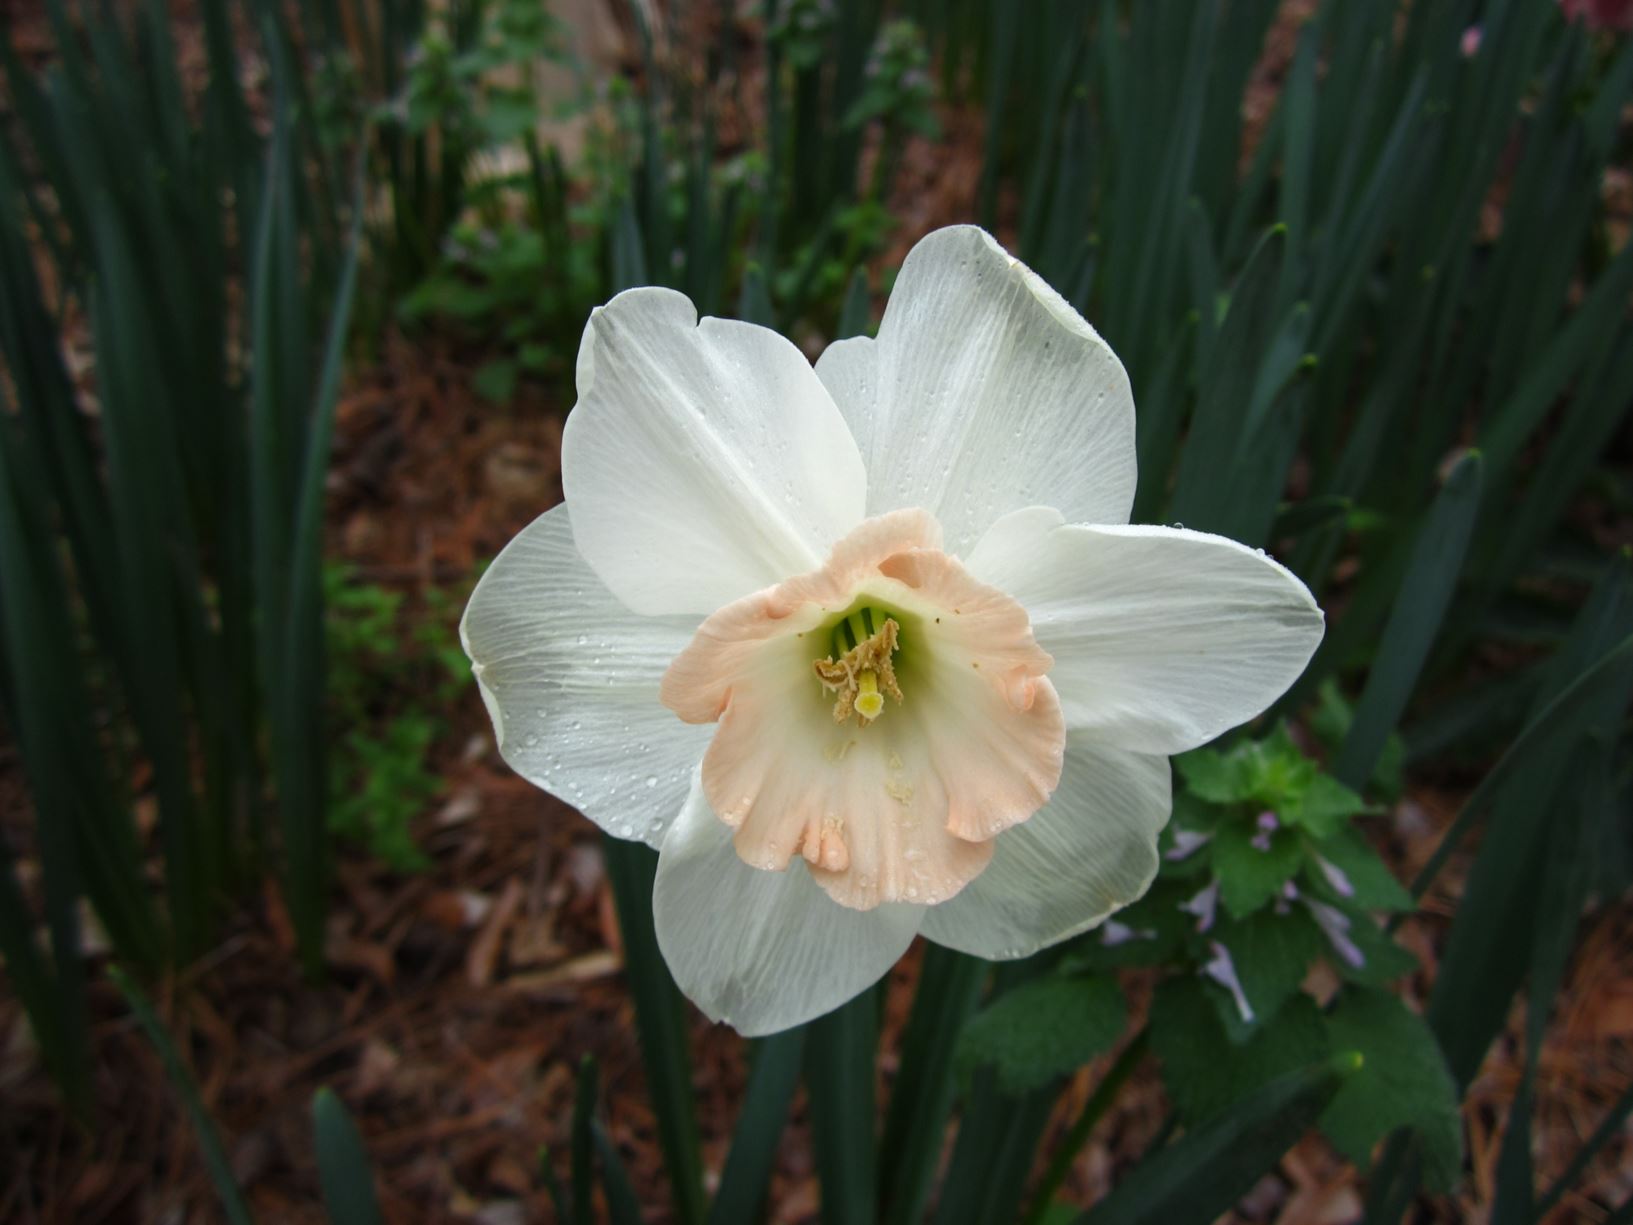 Narcissus 'Romance' - large-cup daffodil